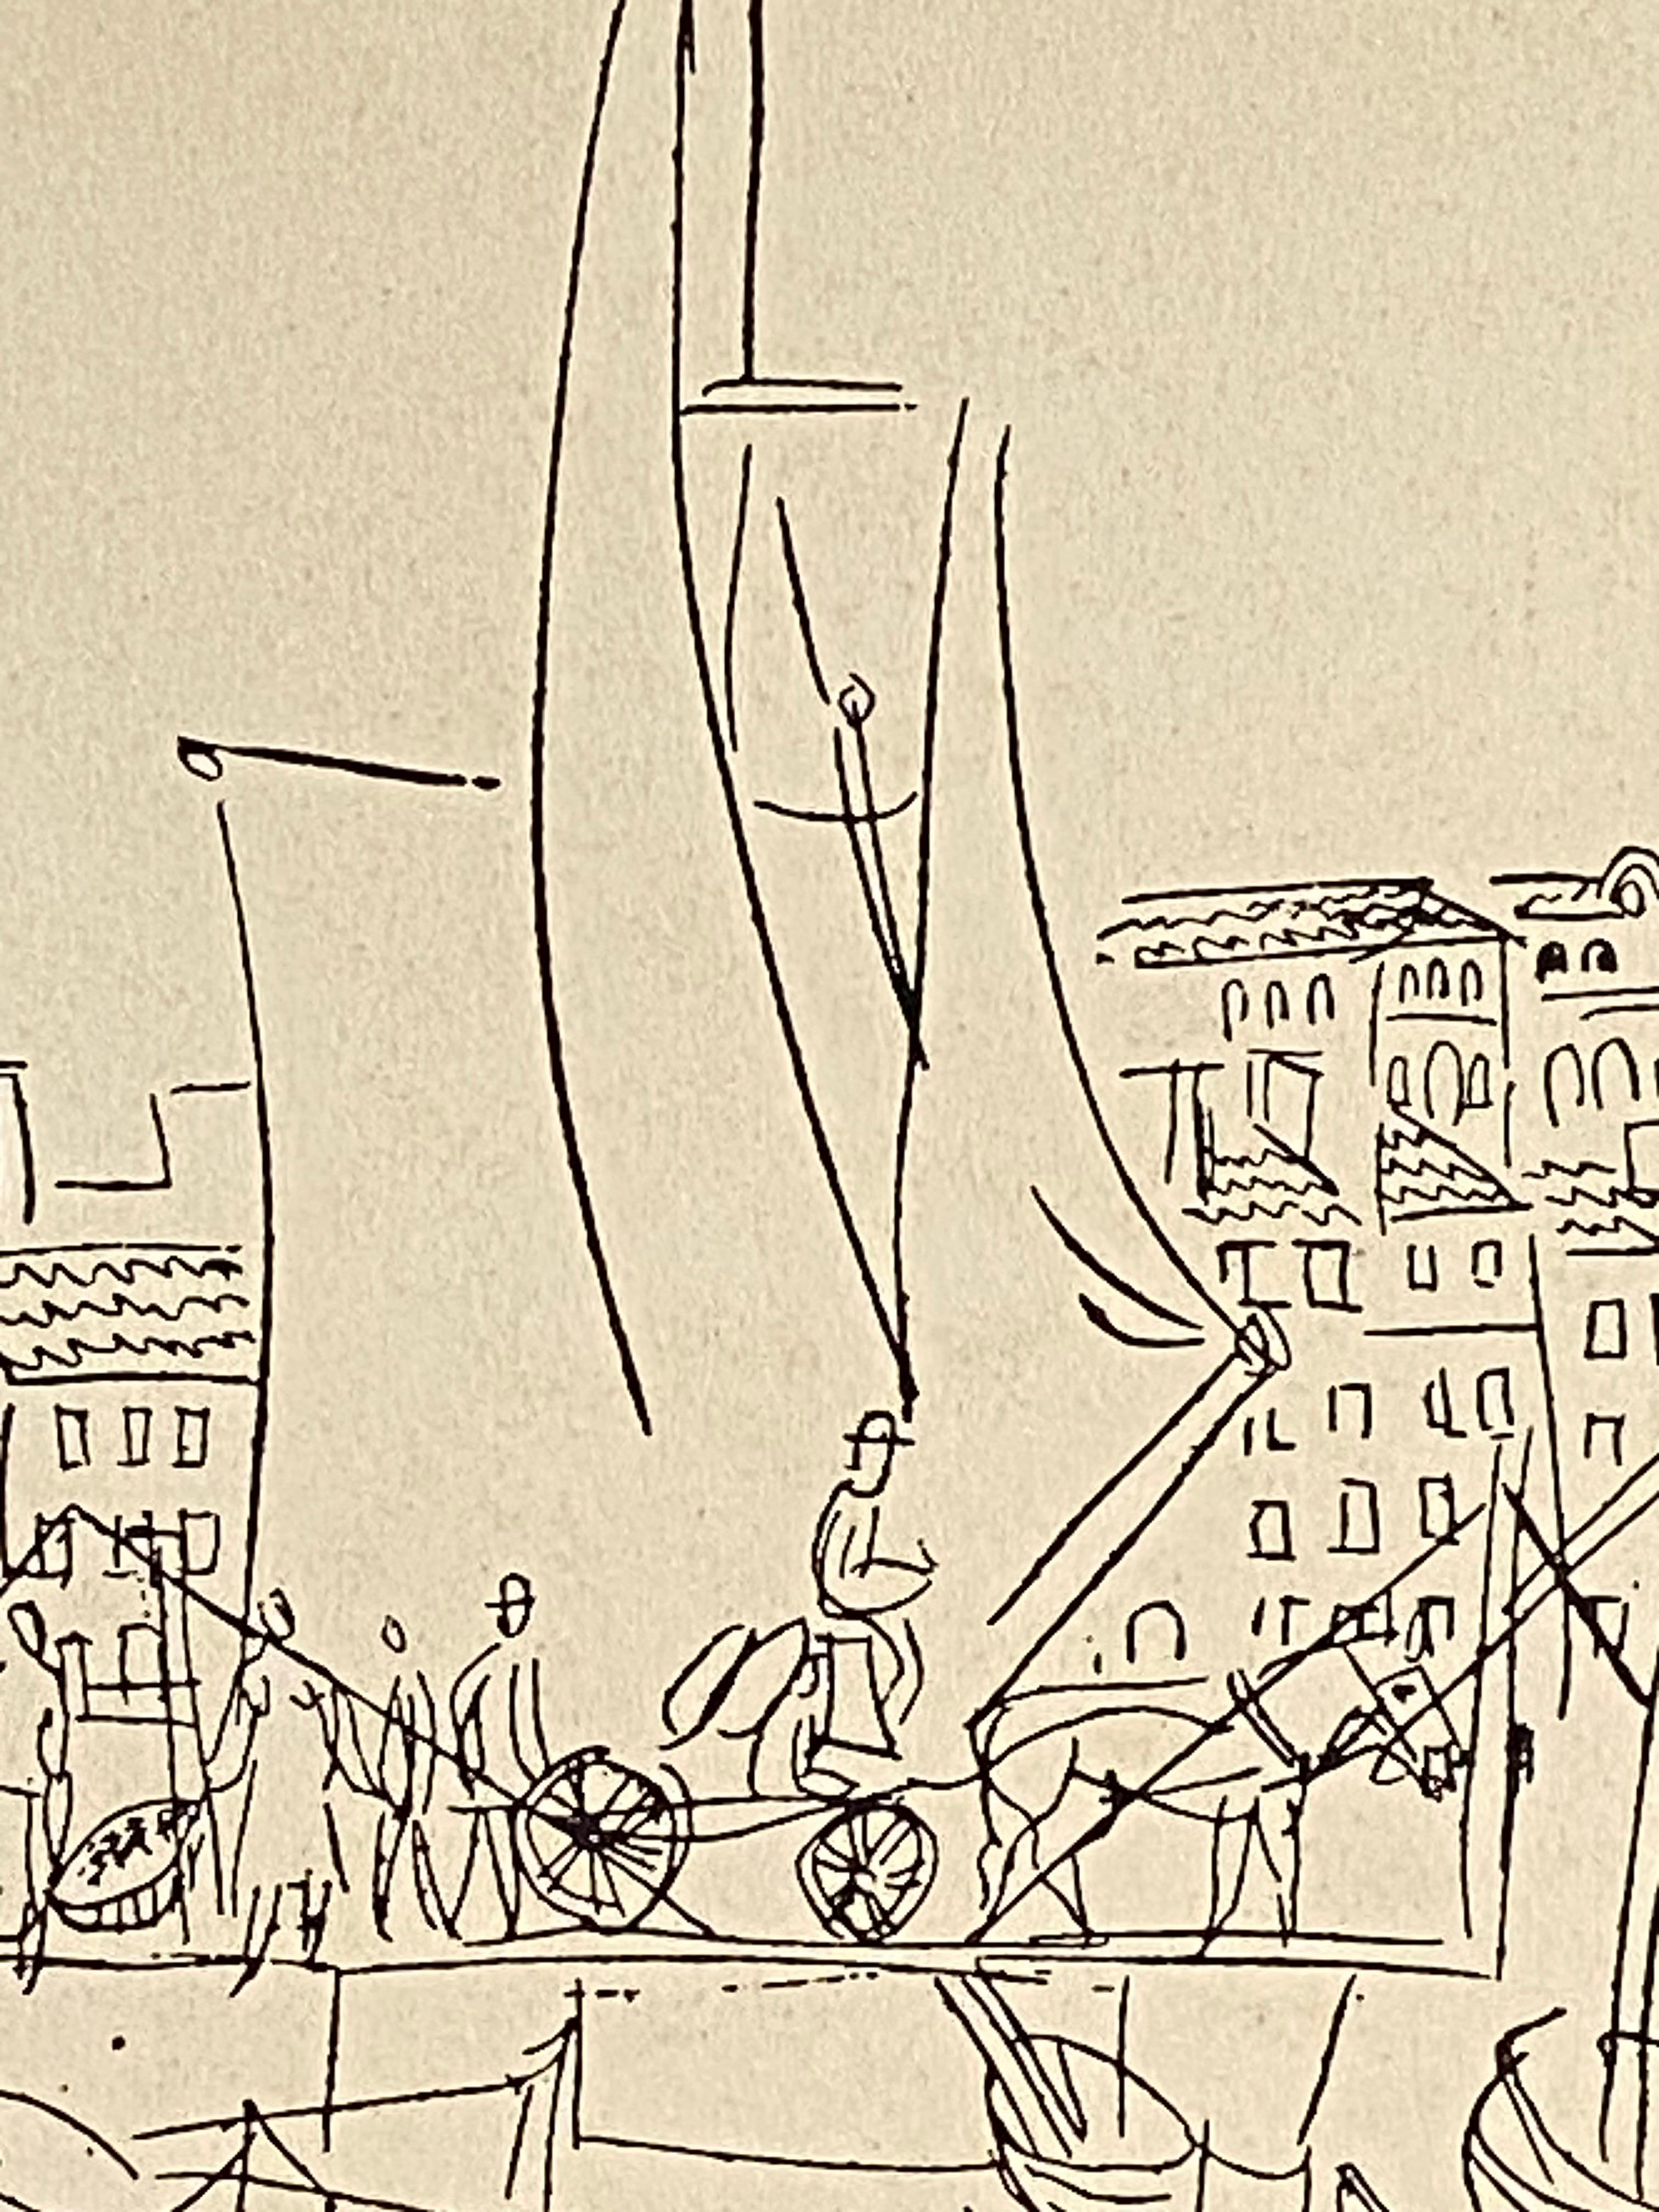 Original lithographic print done as a gravure using black ink attributed to the hand of the well known French artist, Jean Dufy.  Signed in the plate  “Dufy” lower right.  Circa 1960. Condition is very good.  “Pierre Hautot, Paris” label verso.